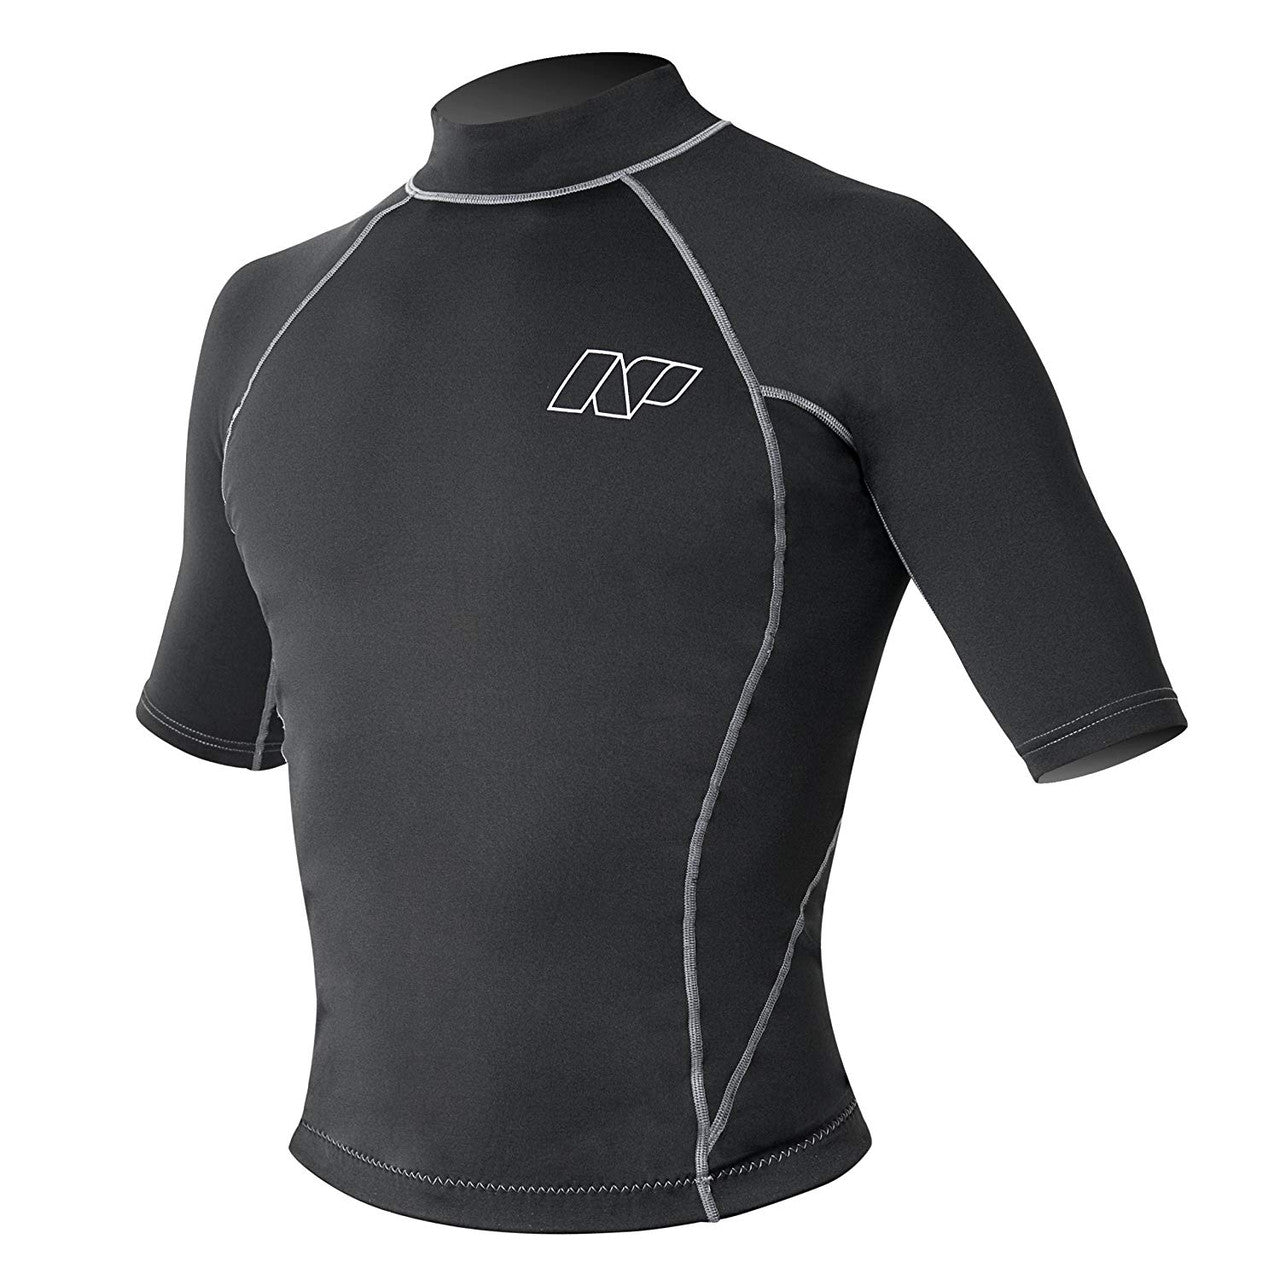 NP Surf Thermalite Short Sleeve Base Layer 70% off